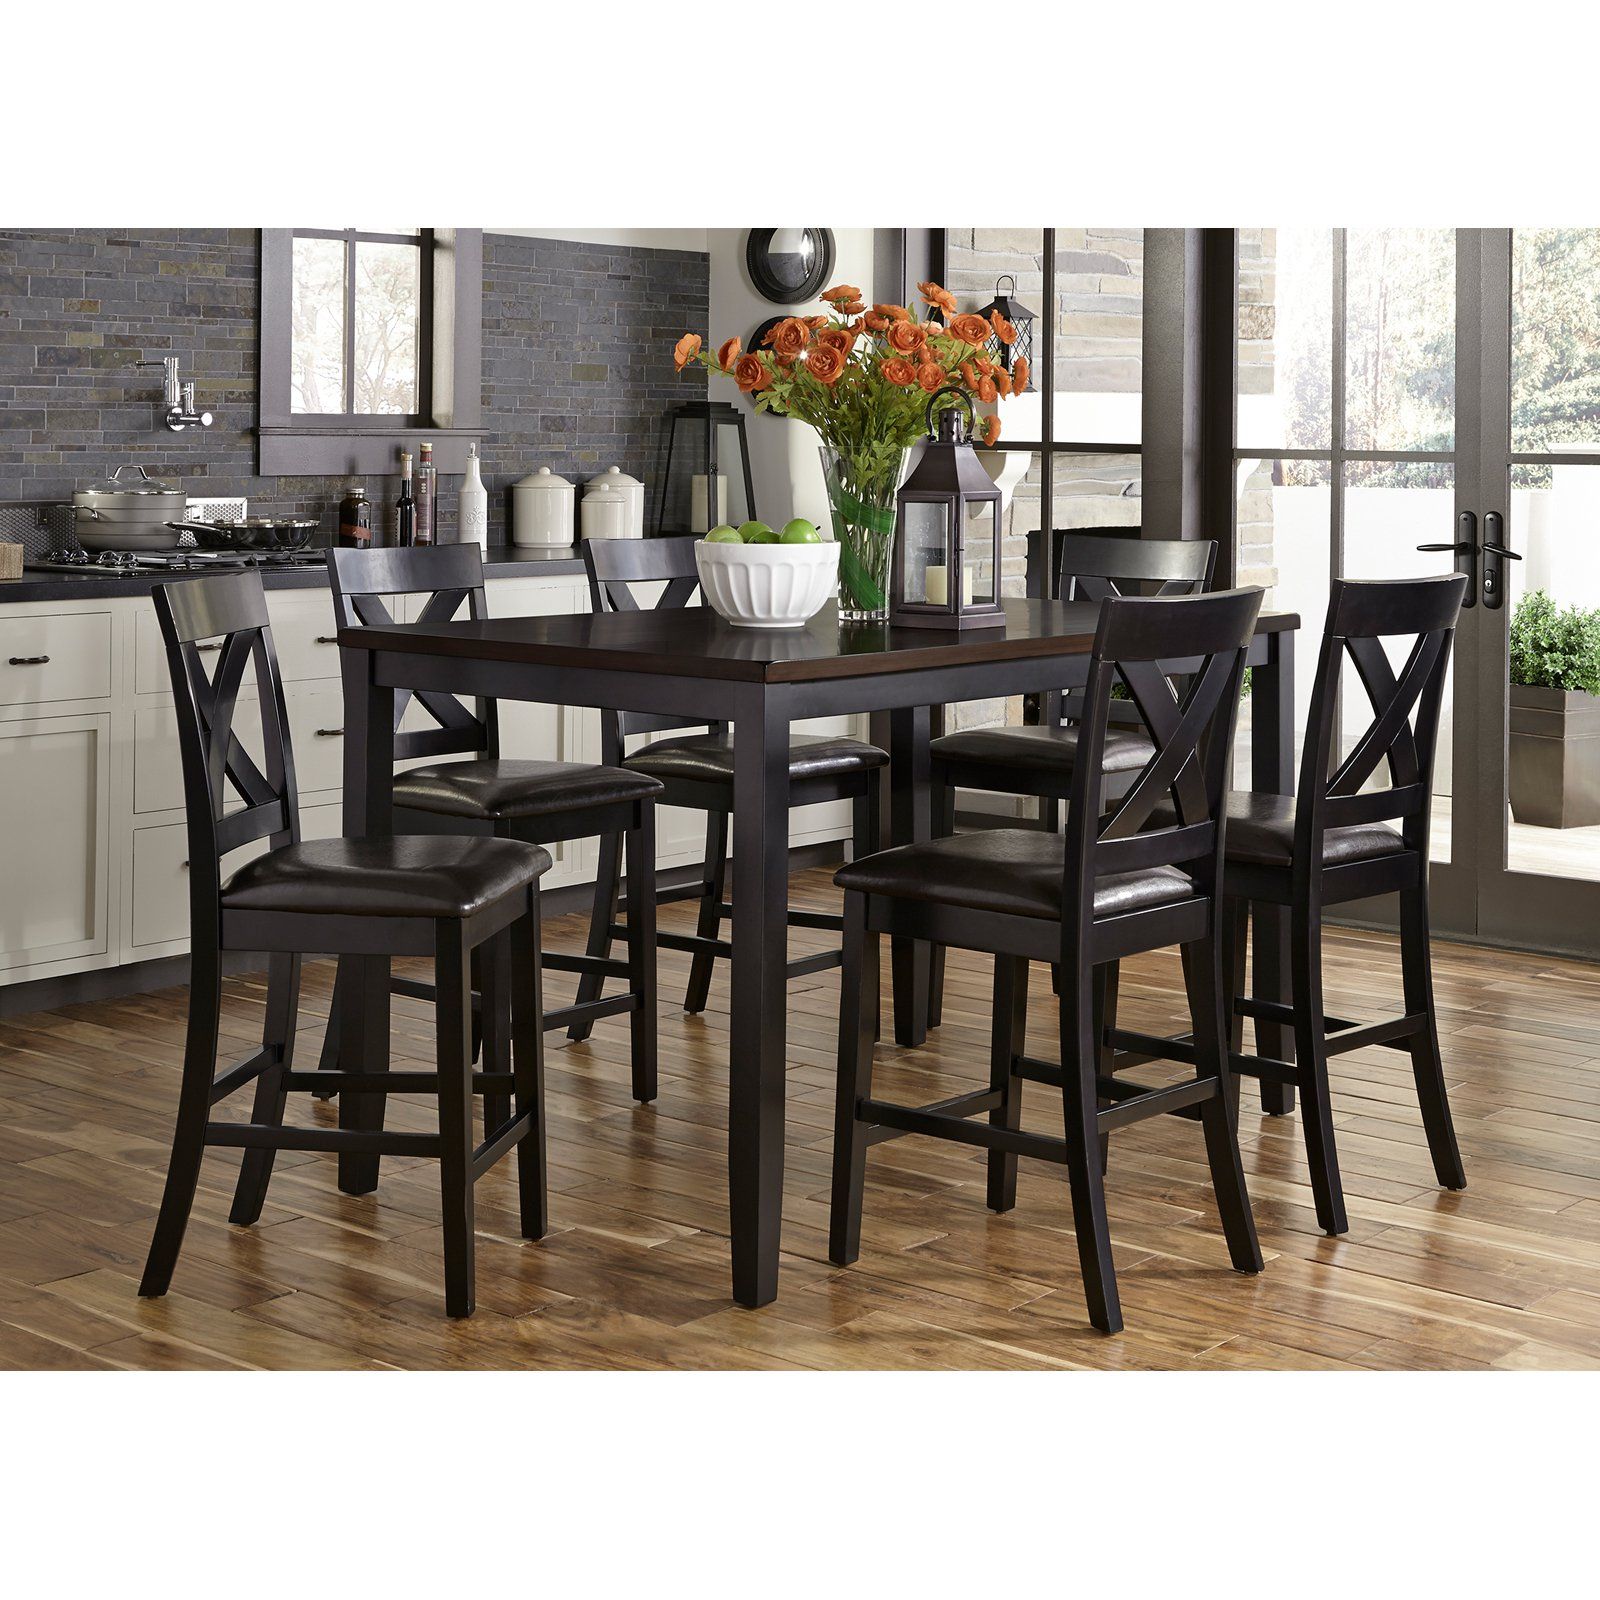 Liberty Furniture Industries Thornton Ii 7 Piece Counter With 2020 Andrenique Bar Height Dining Tables (View 16 of 20)